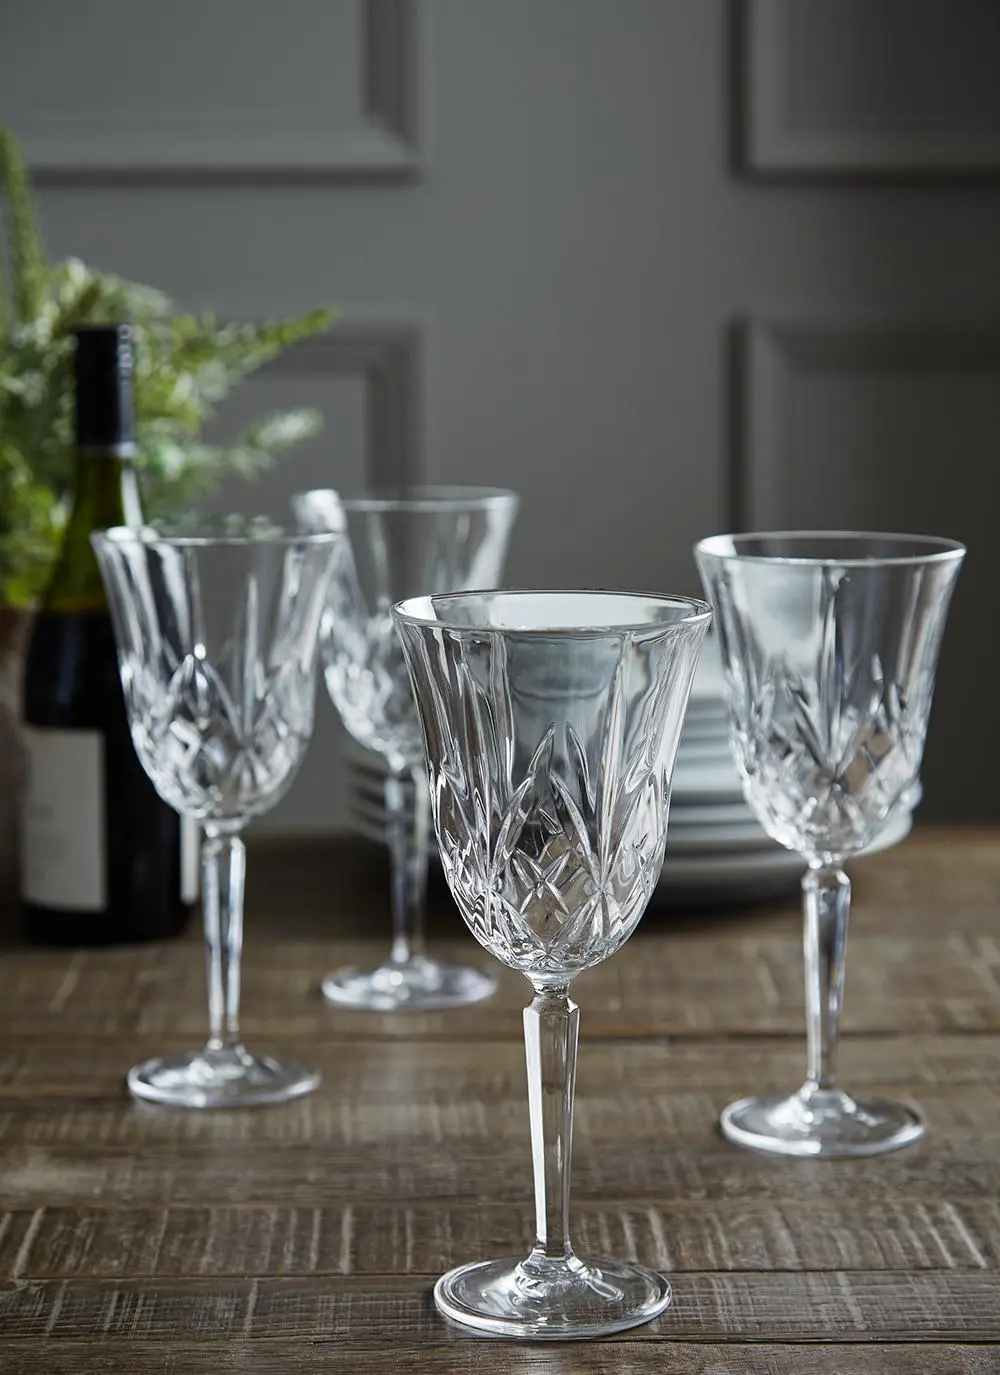 https://www.blarney.com/contentFiles/productImages/Large/Waterford%20Crystal%20Maxwell%20Goblet%20Set%20Of%204.webp